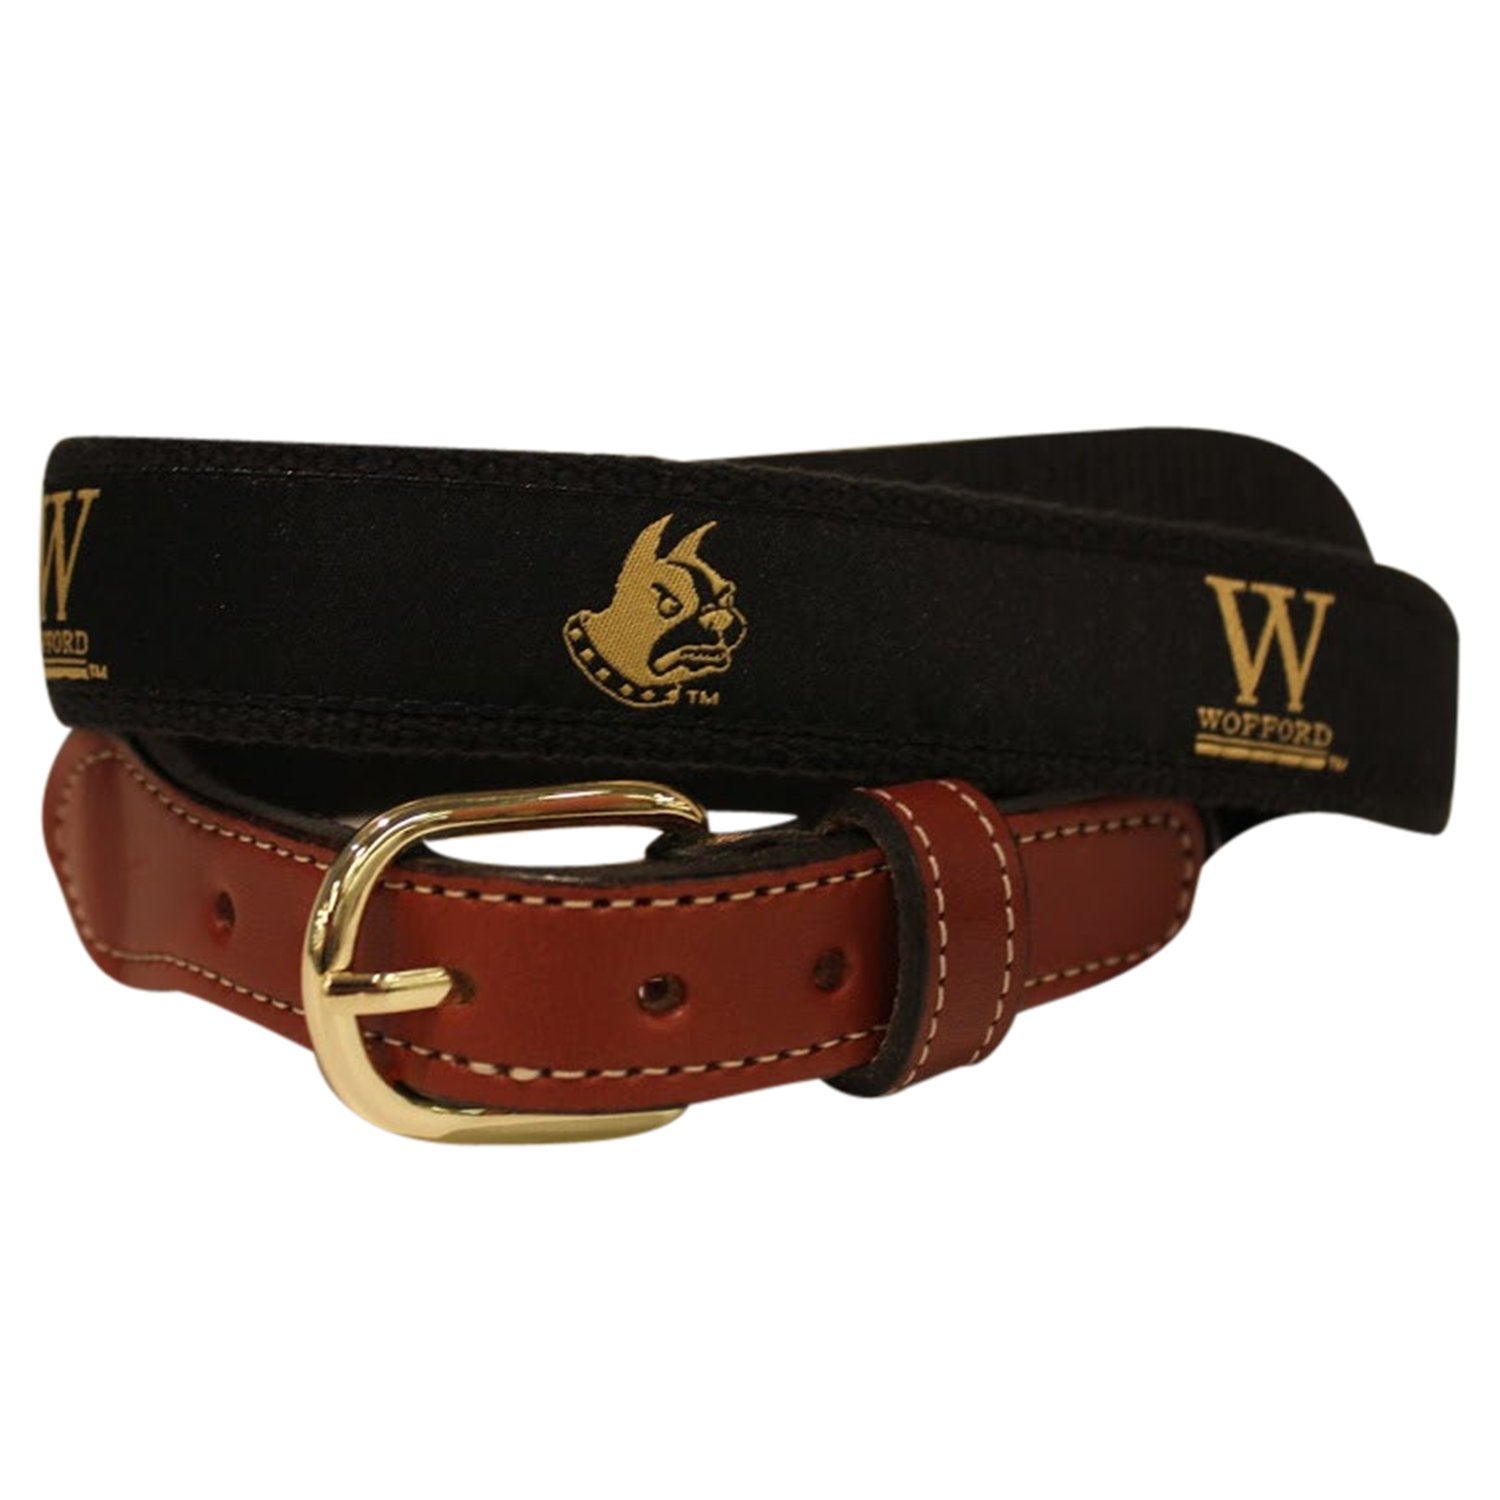 Wofford cotton Web Leather Belt